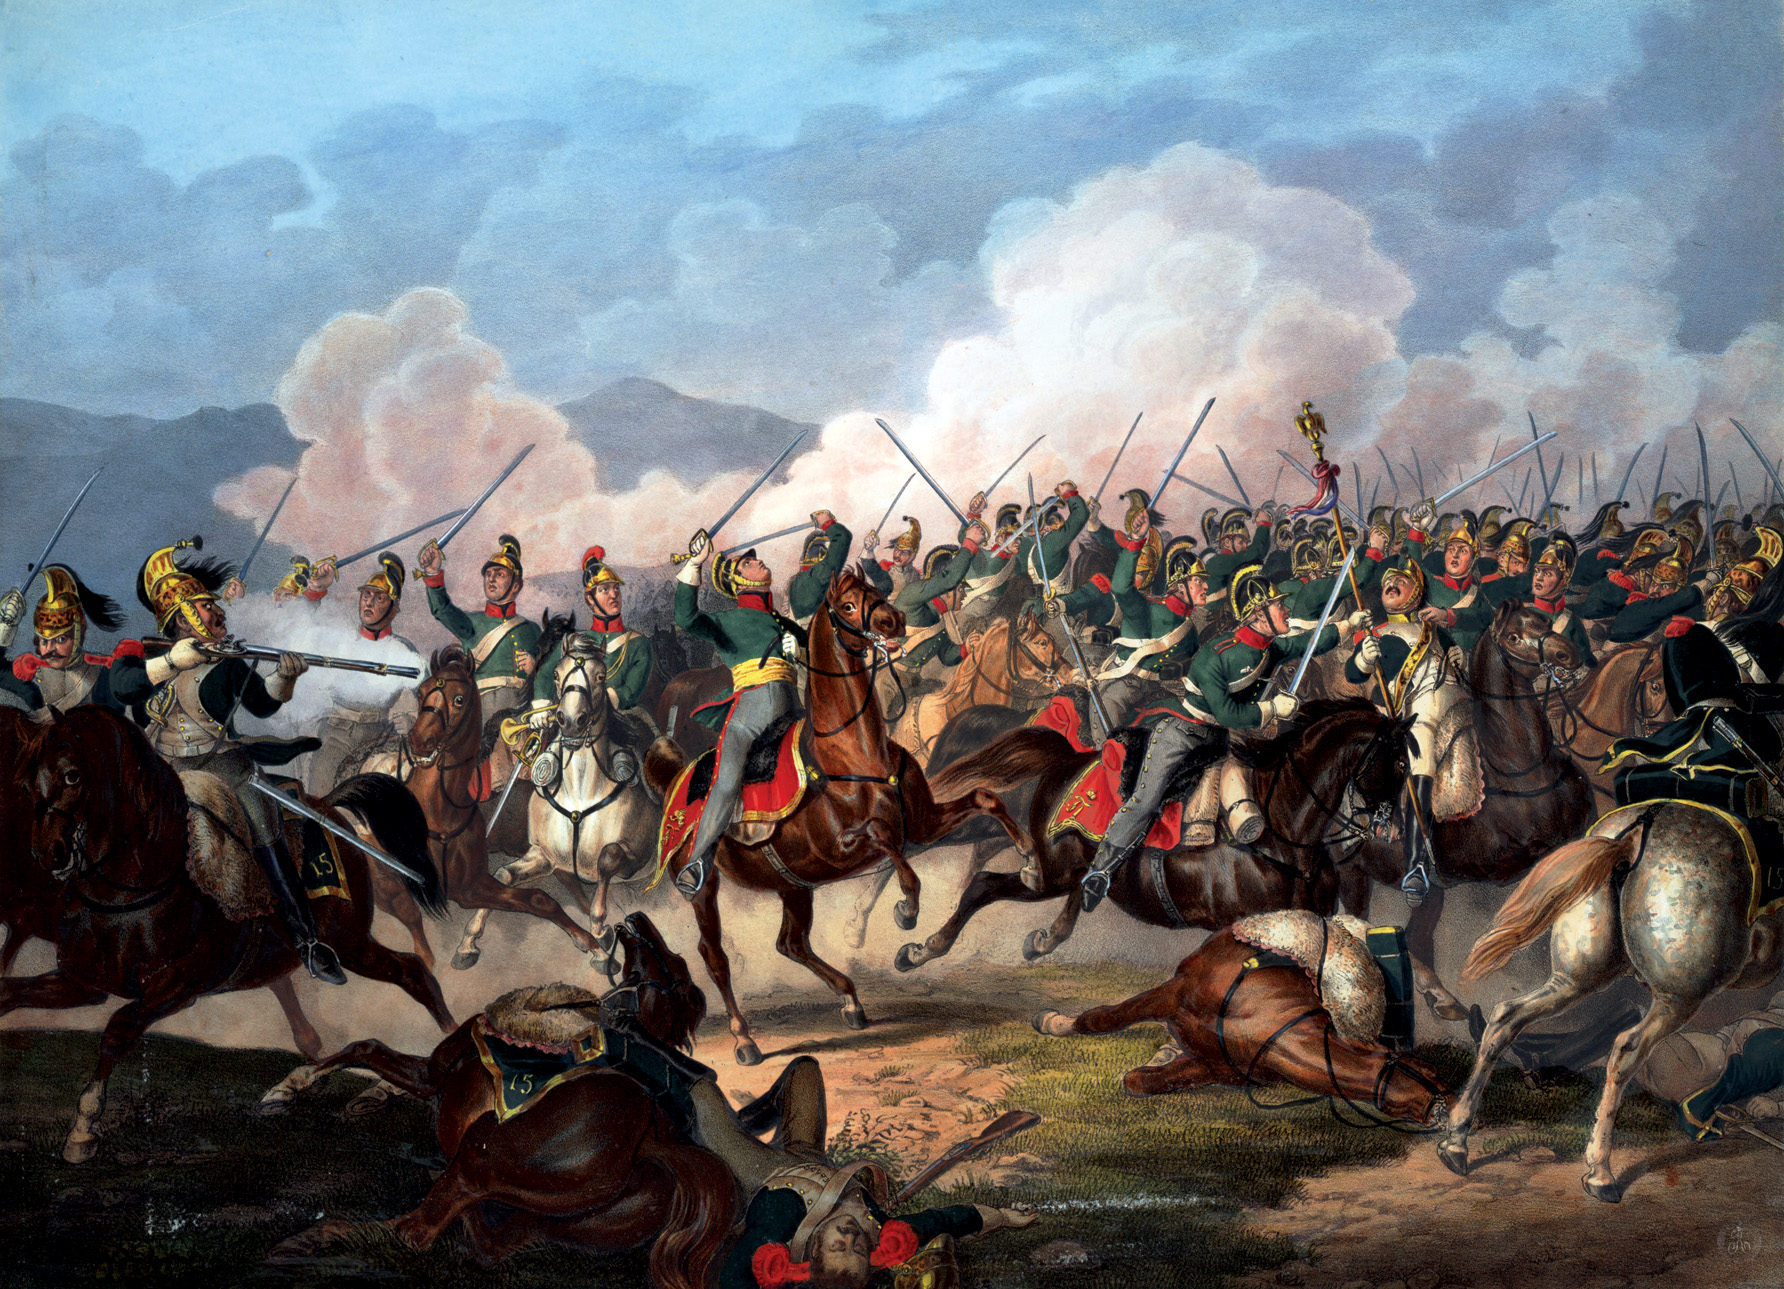 A cavalry clash at Ulm in the Electorate of Bavaria. News of Napoleon's victories at Ulm and Austerlitz in 1805 dampened the spirits of the Third Coalition’s Neapolitan army based at Gaeta.